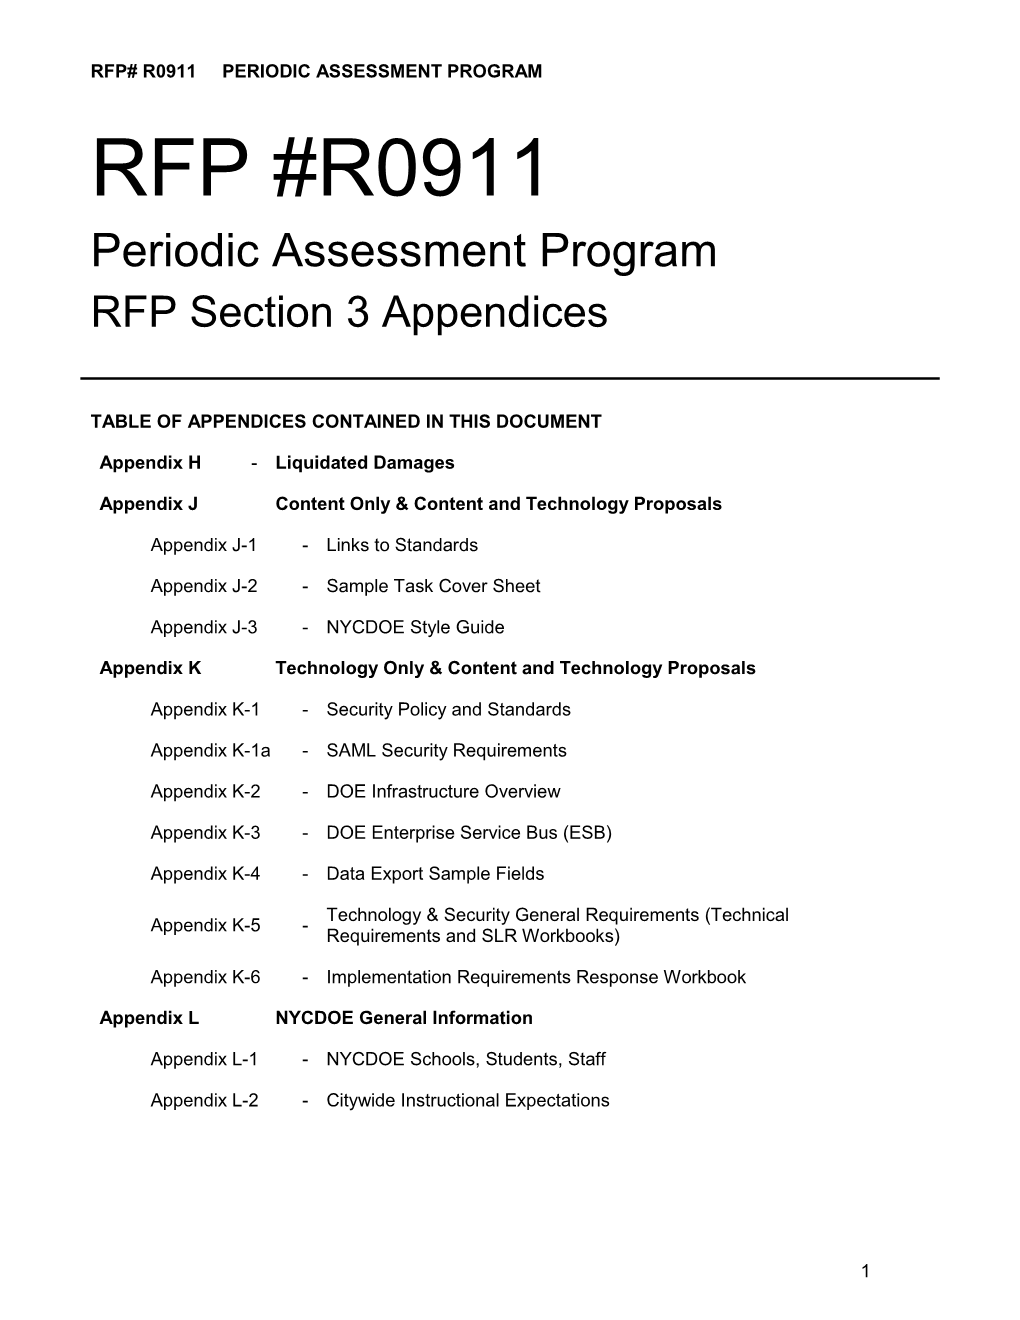 RFP #R0911 Periodic Assessment Program RFP Section 3 Appendices